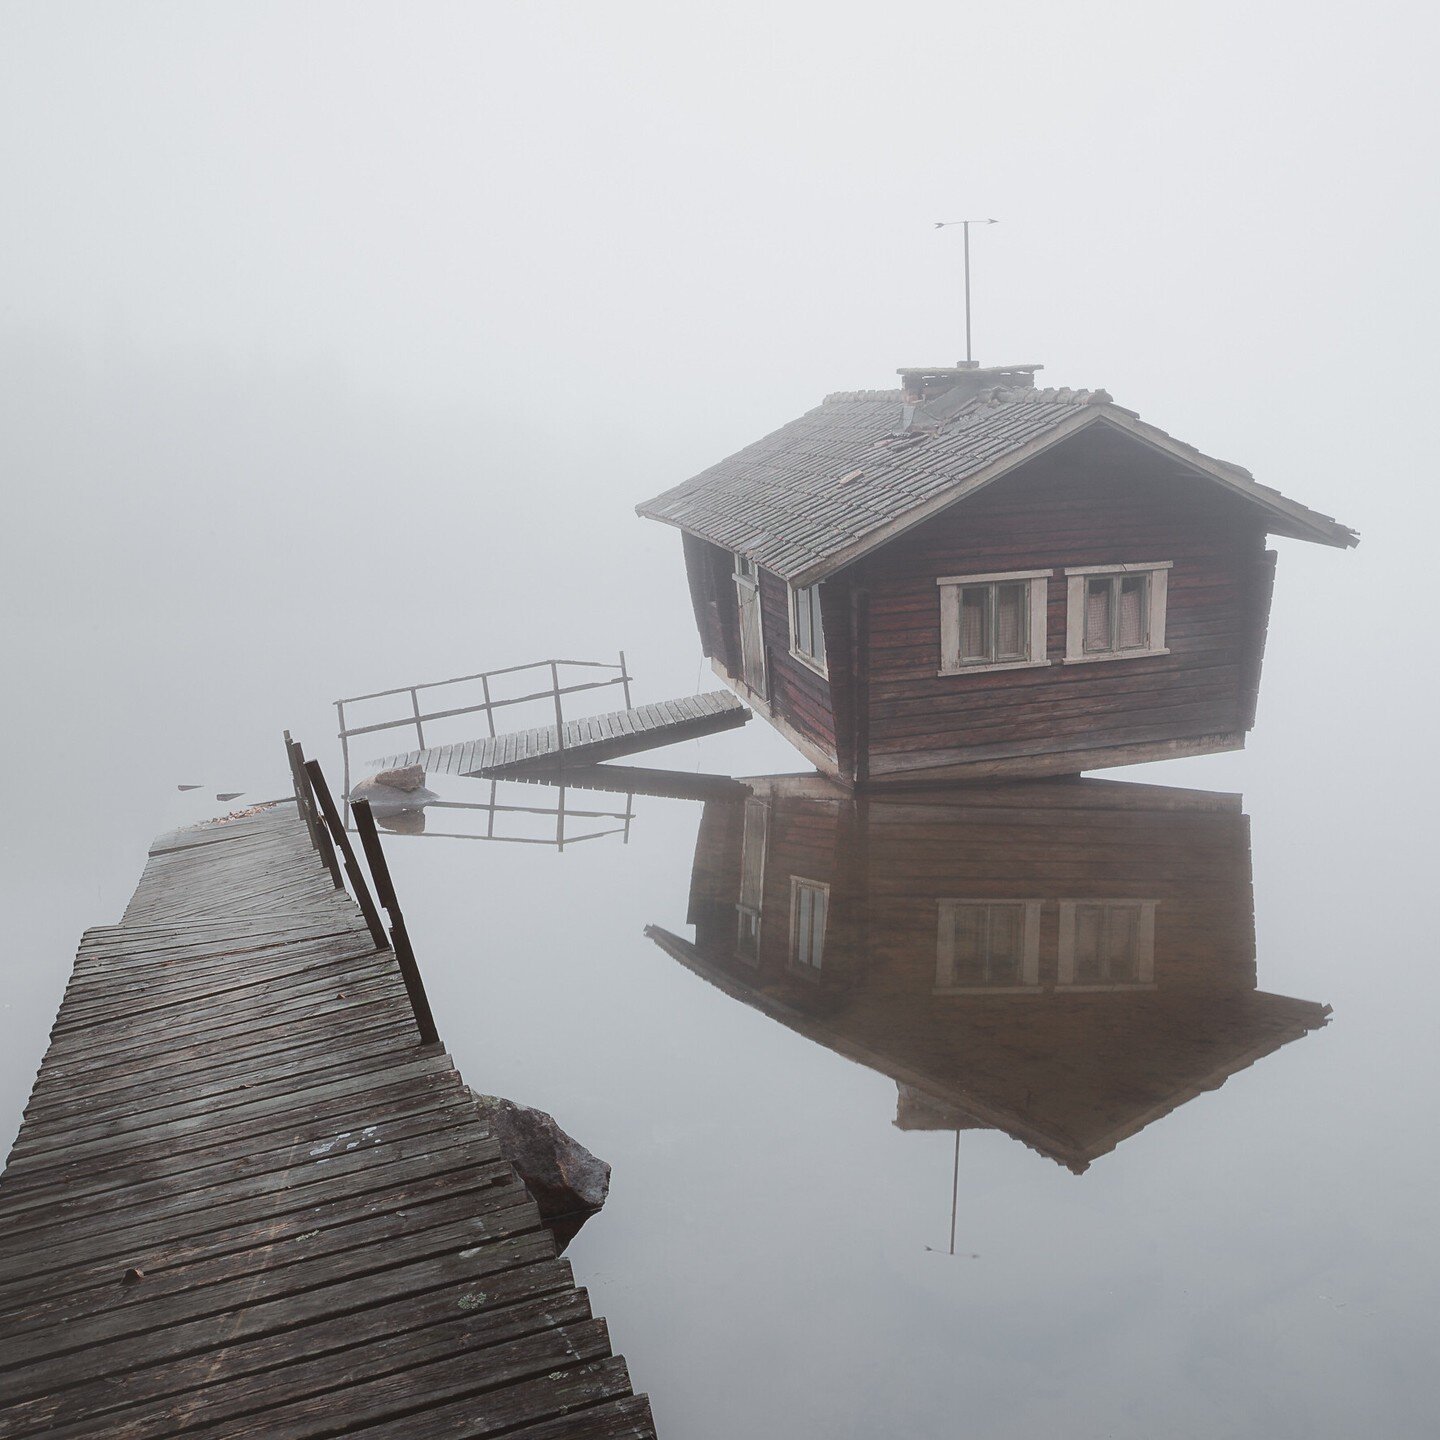 If there&rsquo;s one building in Finland that the photographing world has been drawn to for years, it is this private sauna in Southern Finland.

The legend has it that it was abandoned ages ago by the owner getting bored of the curious swimmers from